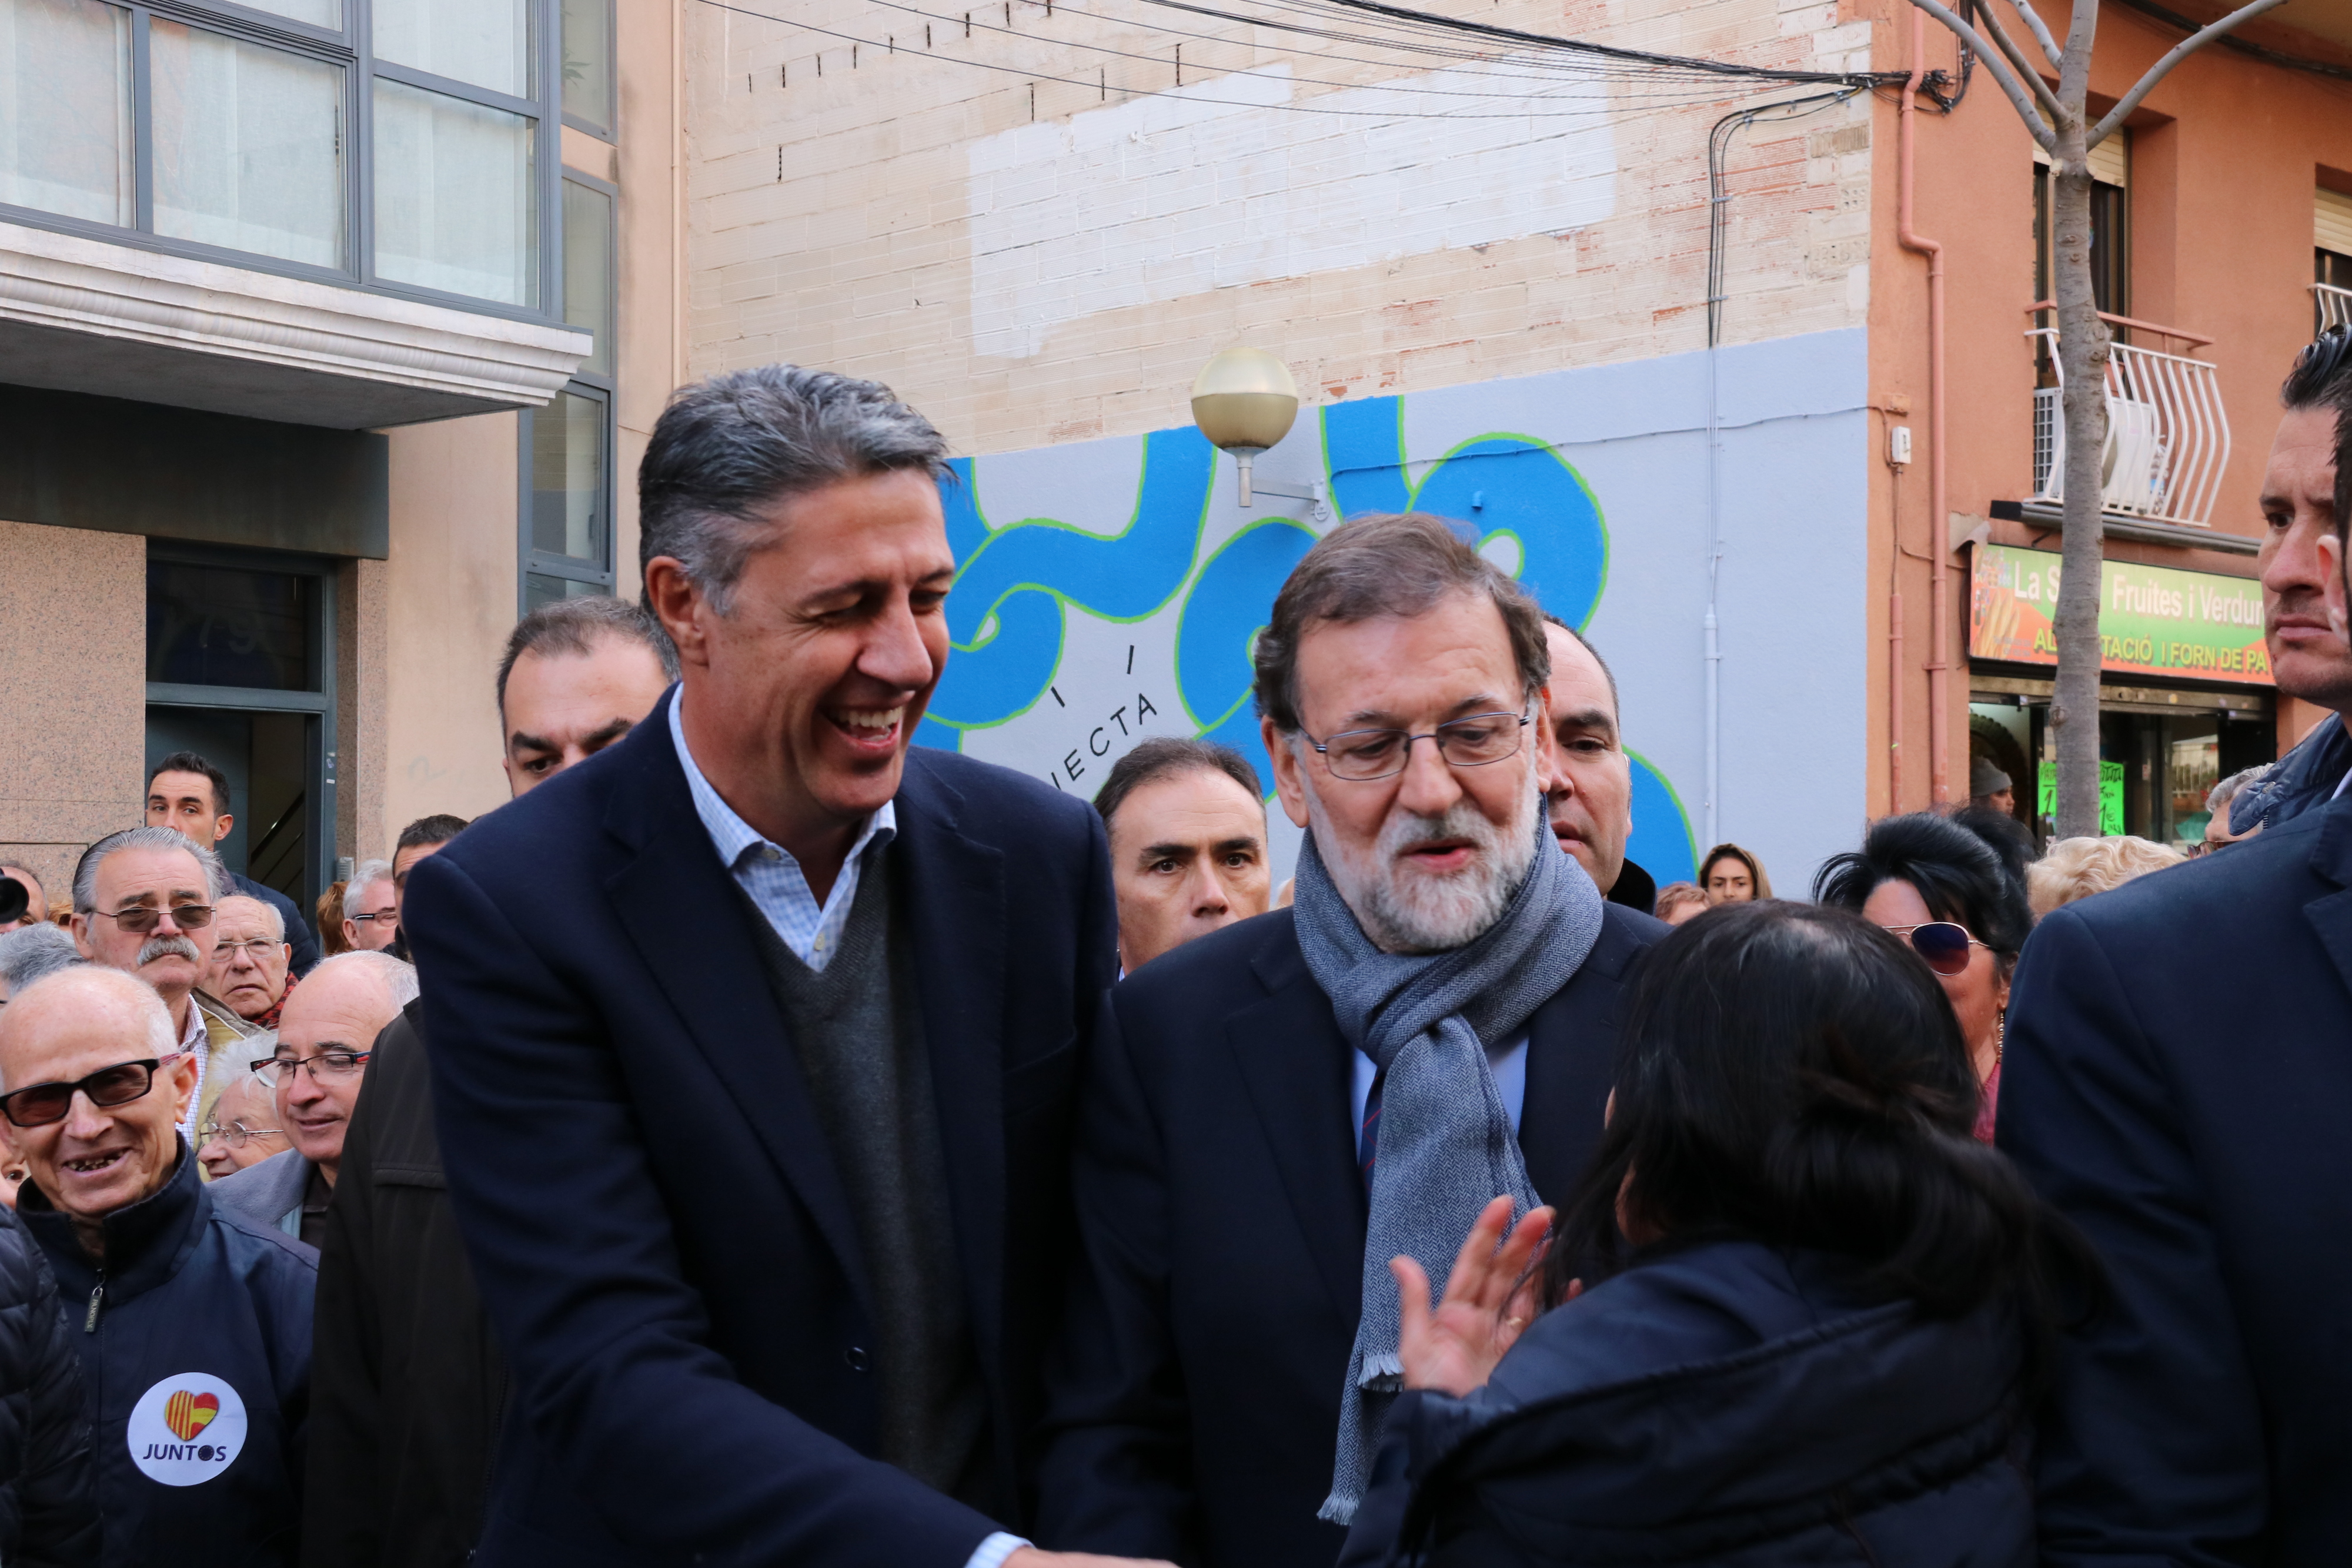 Spanish president Mariano Rajoy with Catalan People's Party leader Xavier Garcia Albiol (by ACN)